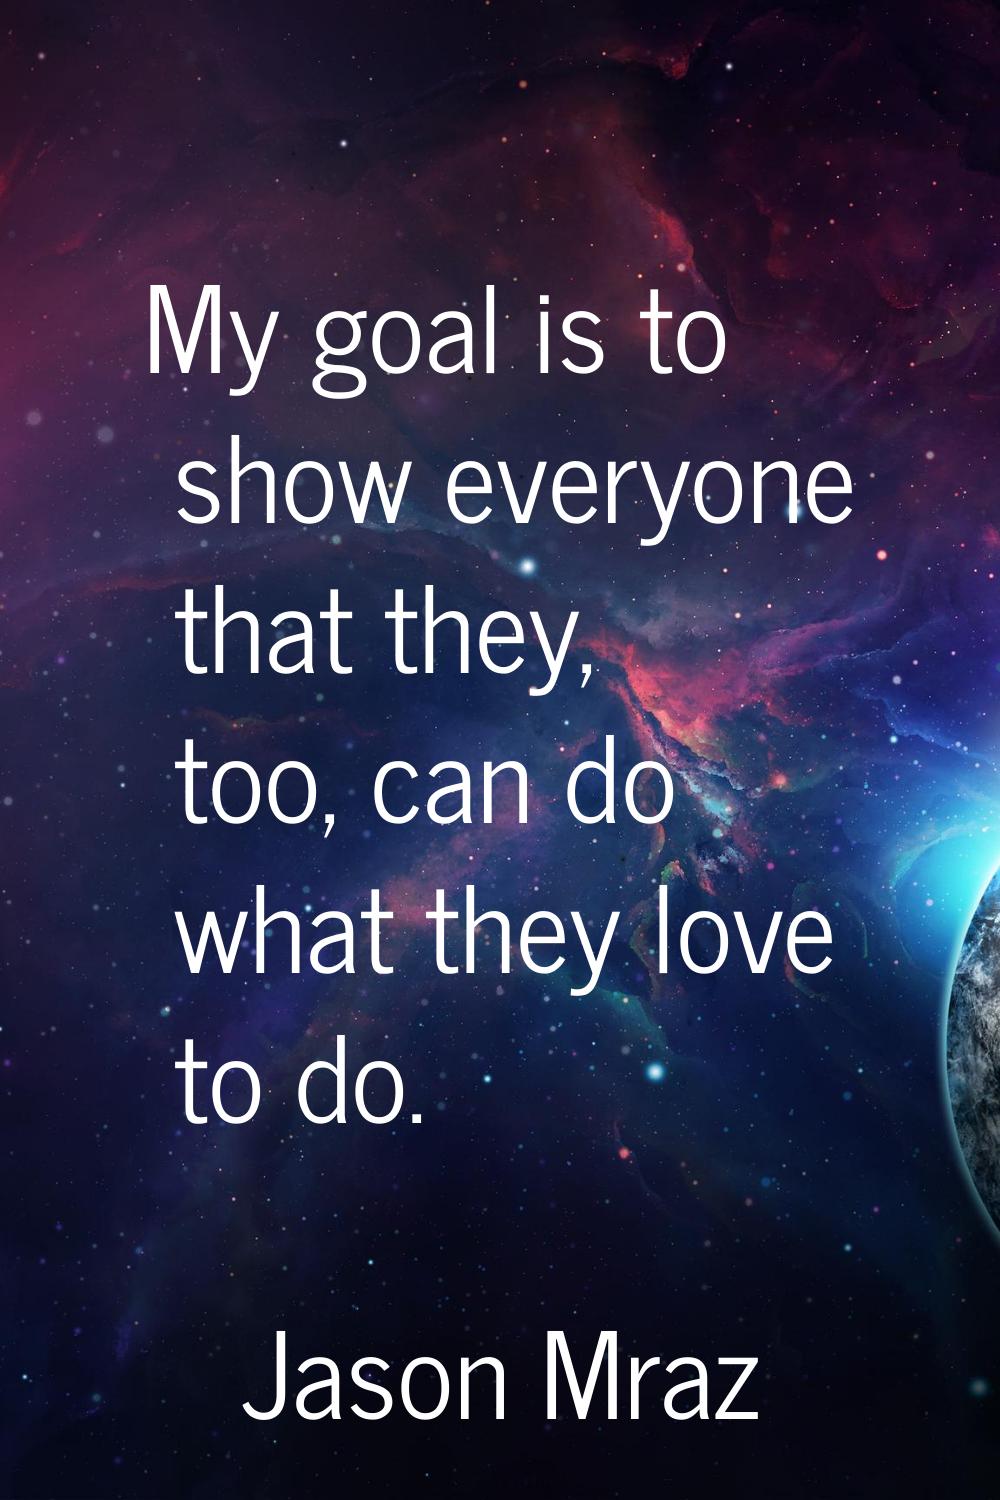 My goal is to show everyone that they, too, can do what they love to do.